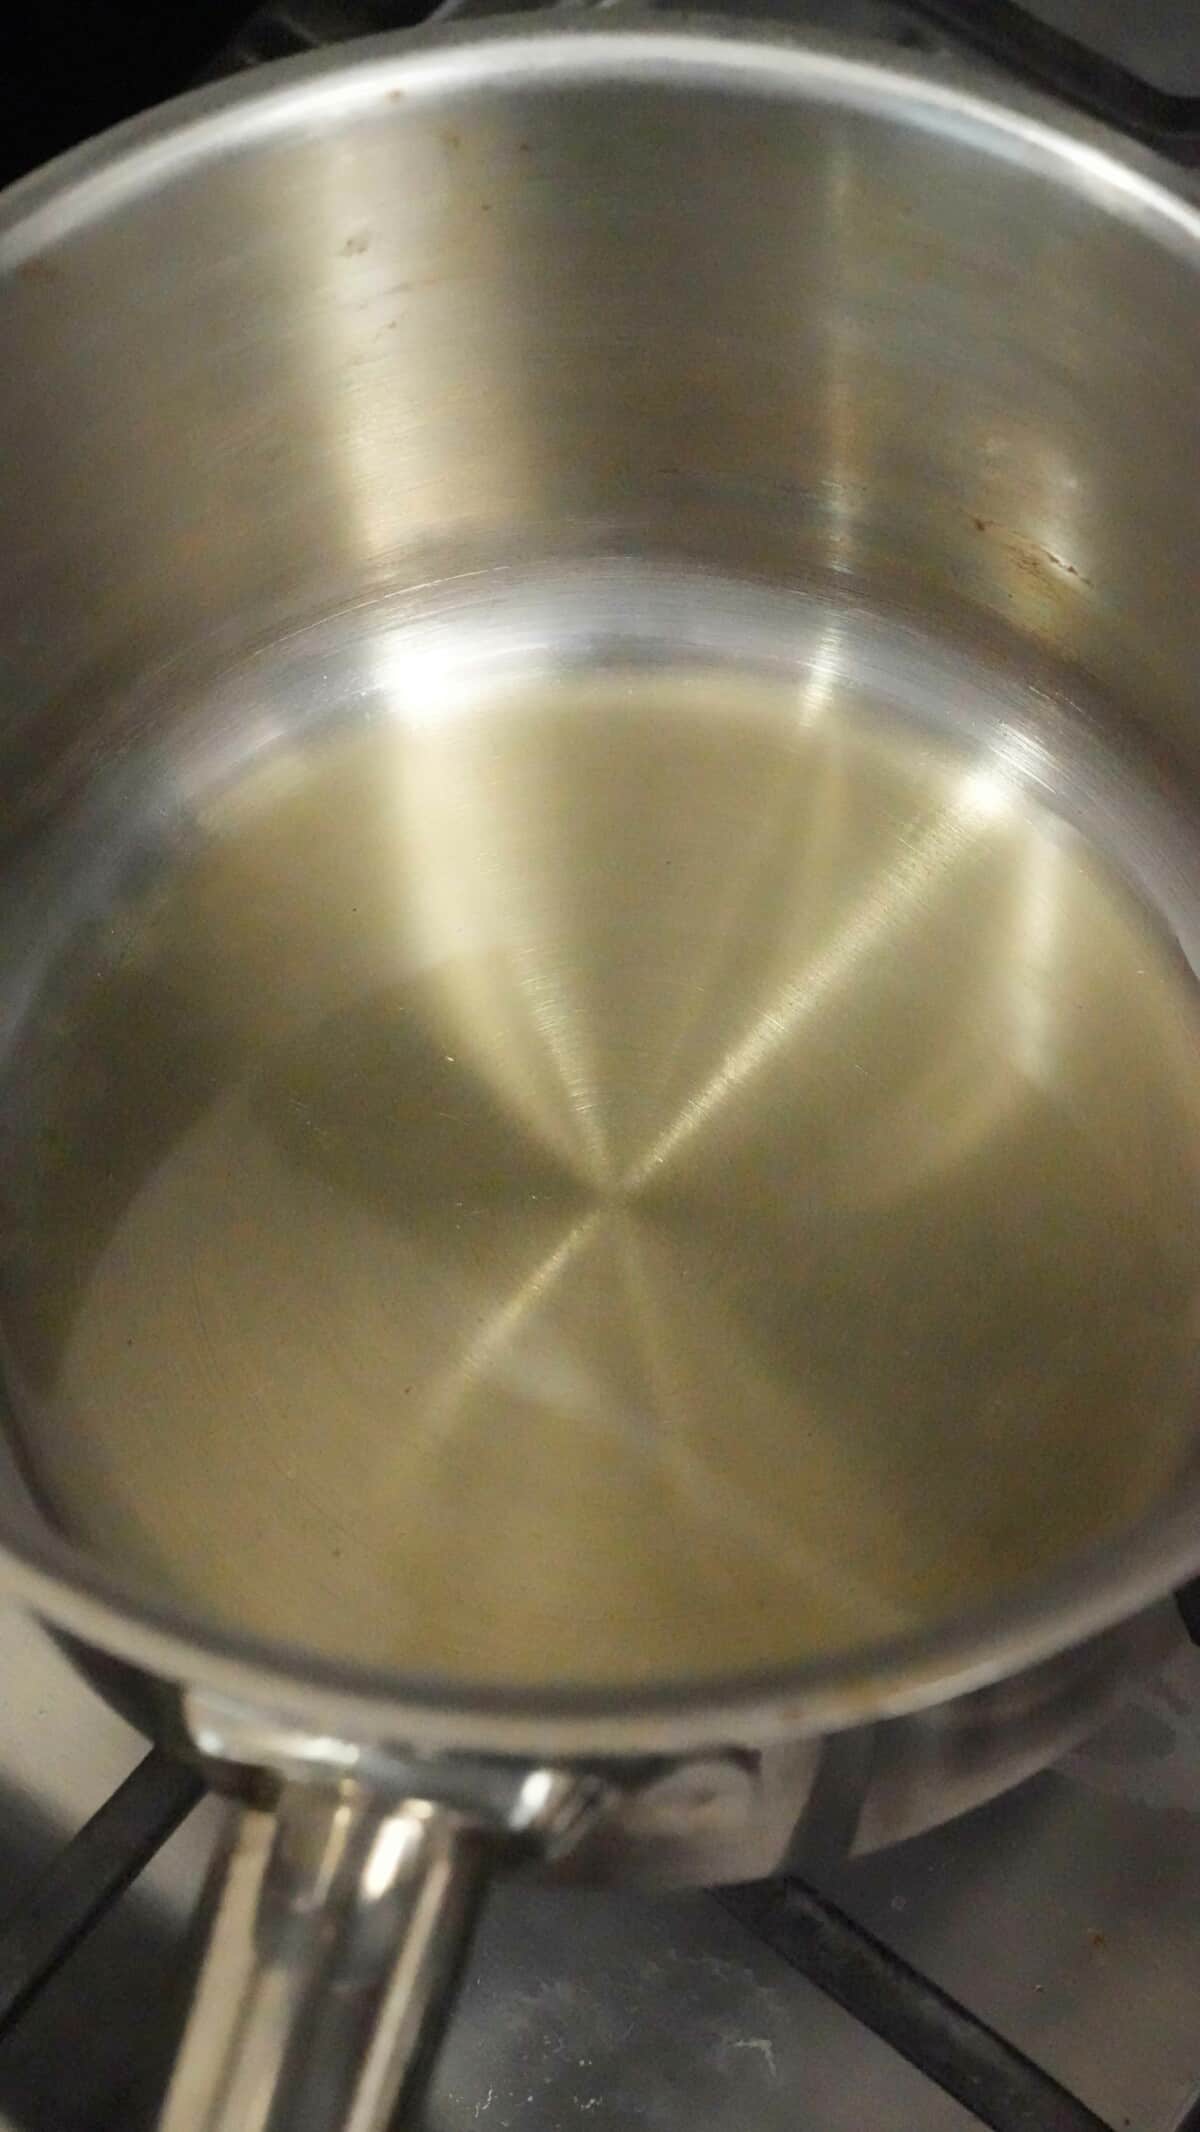 Two tablespoons of avocado oil being heated up in a small saucepan.